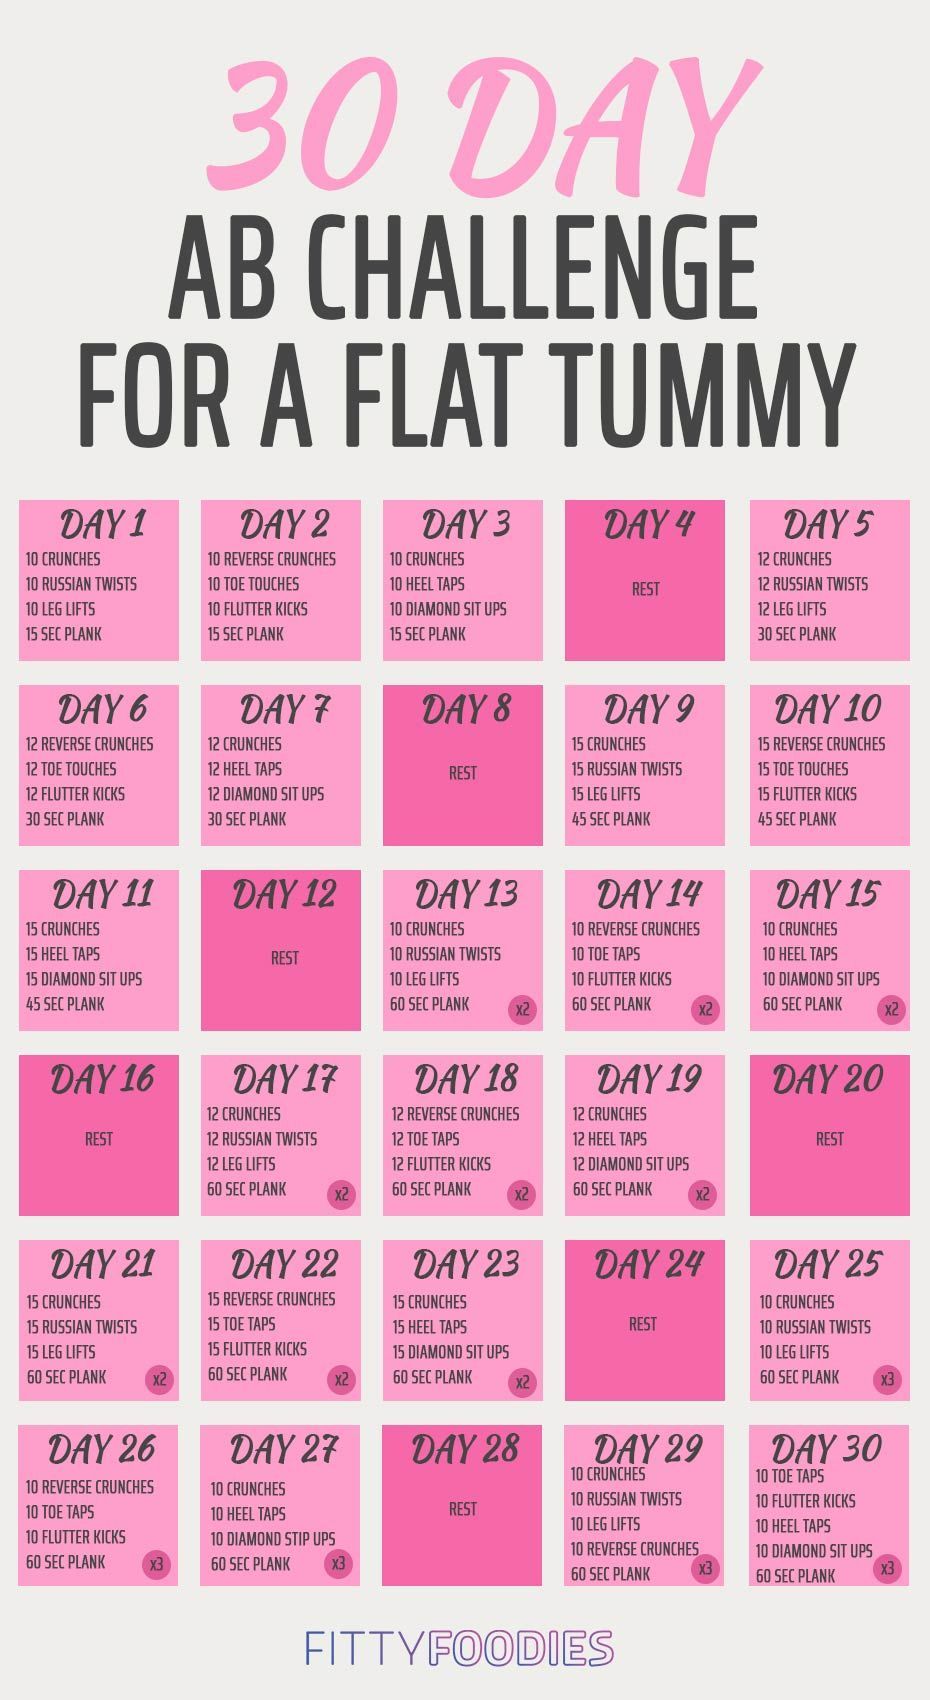 The 30-Day Ab Challenge For A Flat Tummy - FittyFoodies - The 30-Day Ab Challenge For A Flat Tummy - FittyFoodies -   19 summer fitness Challenge ideas